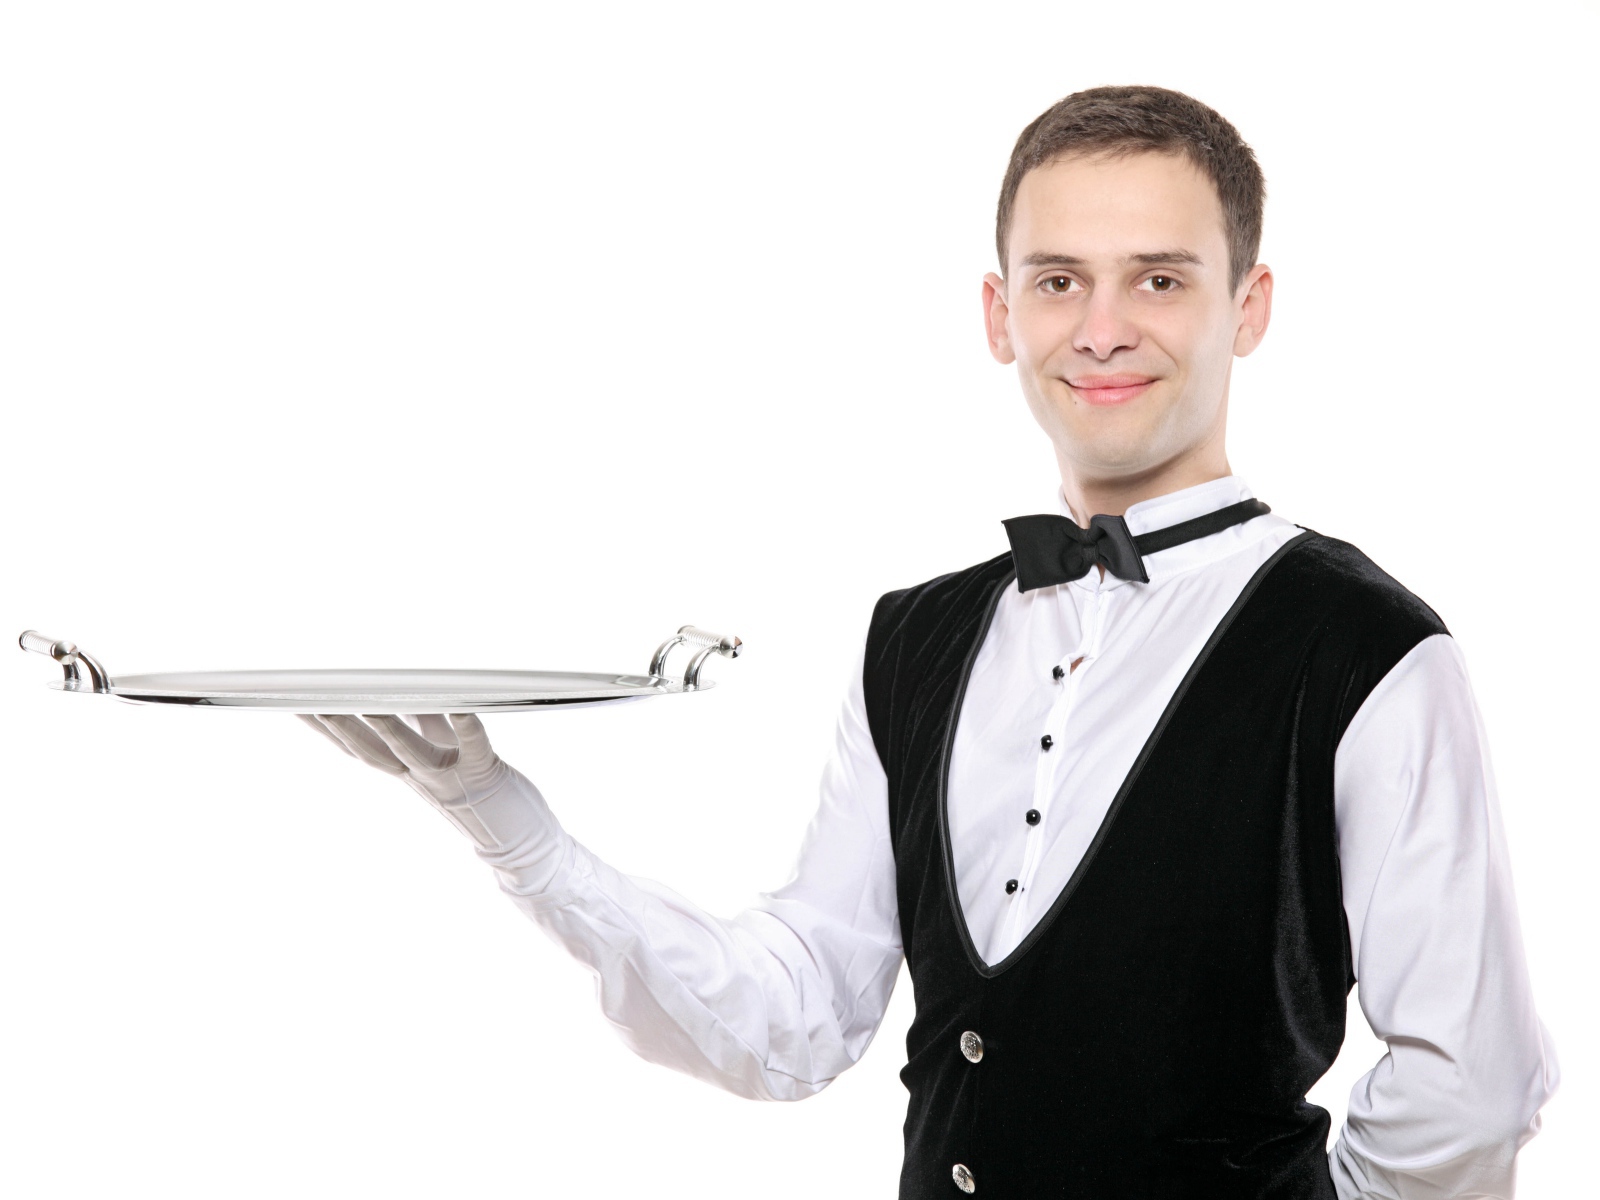 Male waiter with a tray in hand on white background